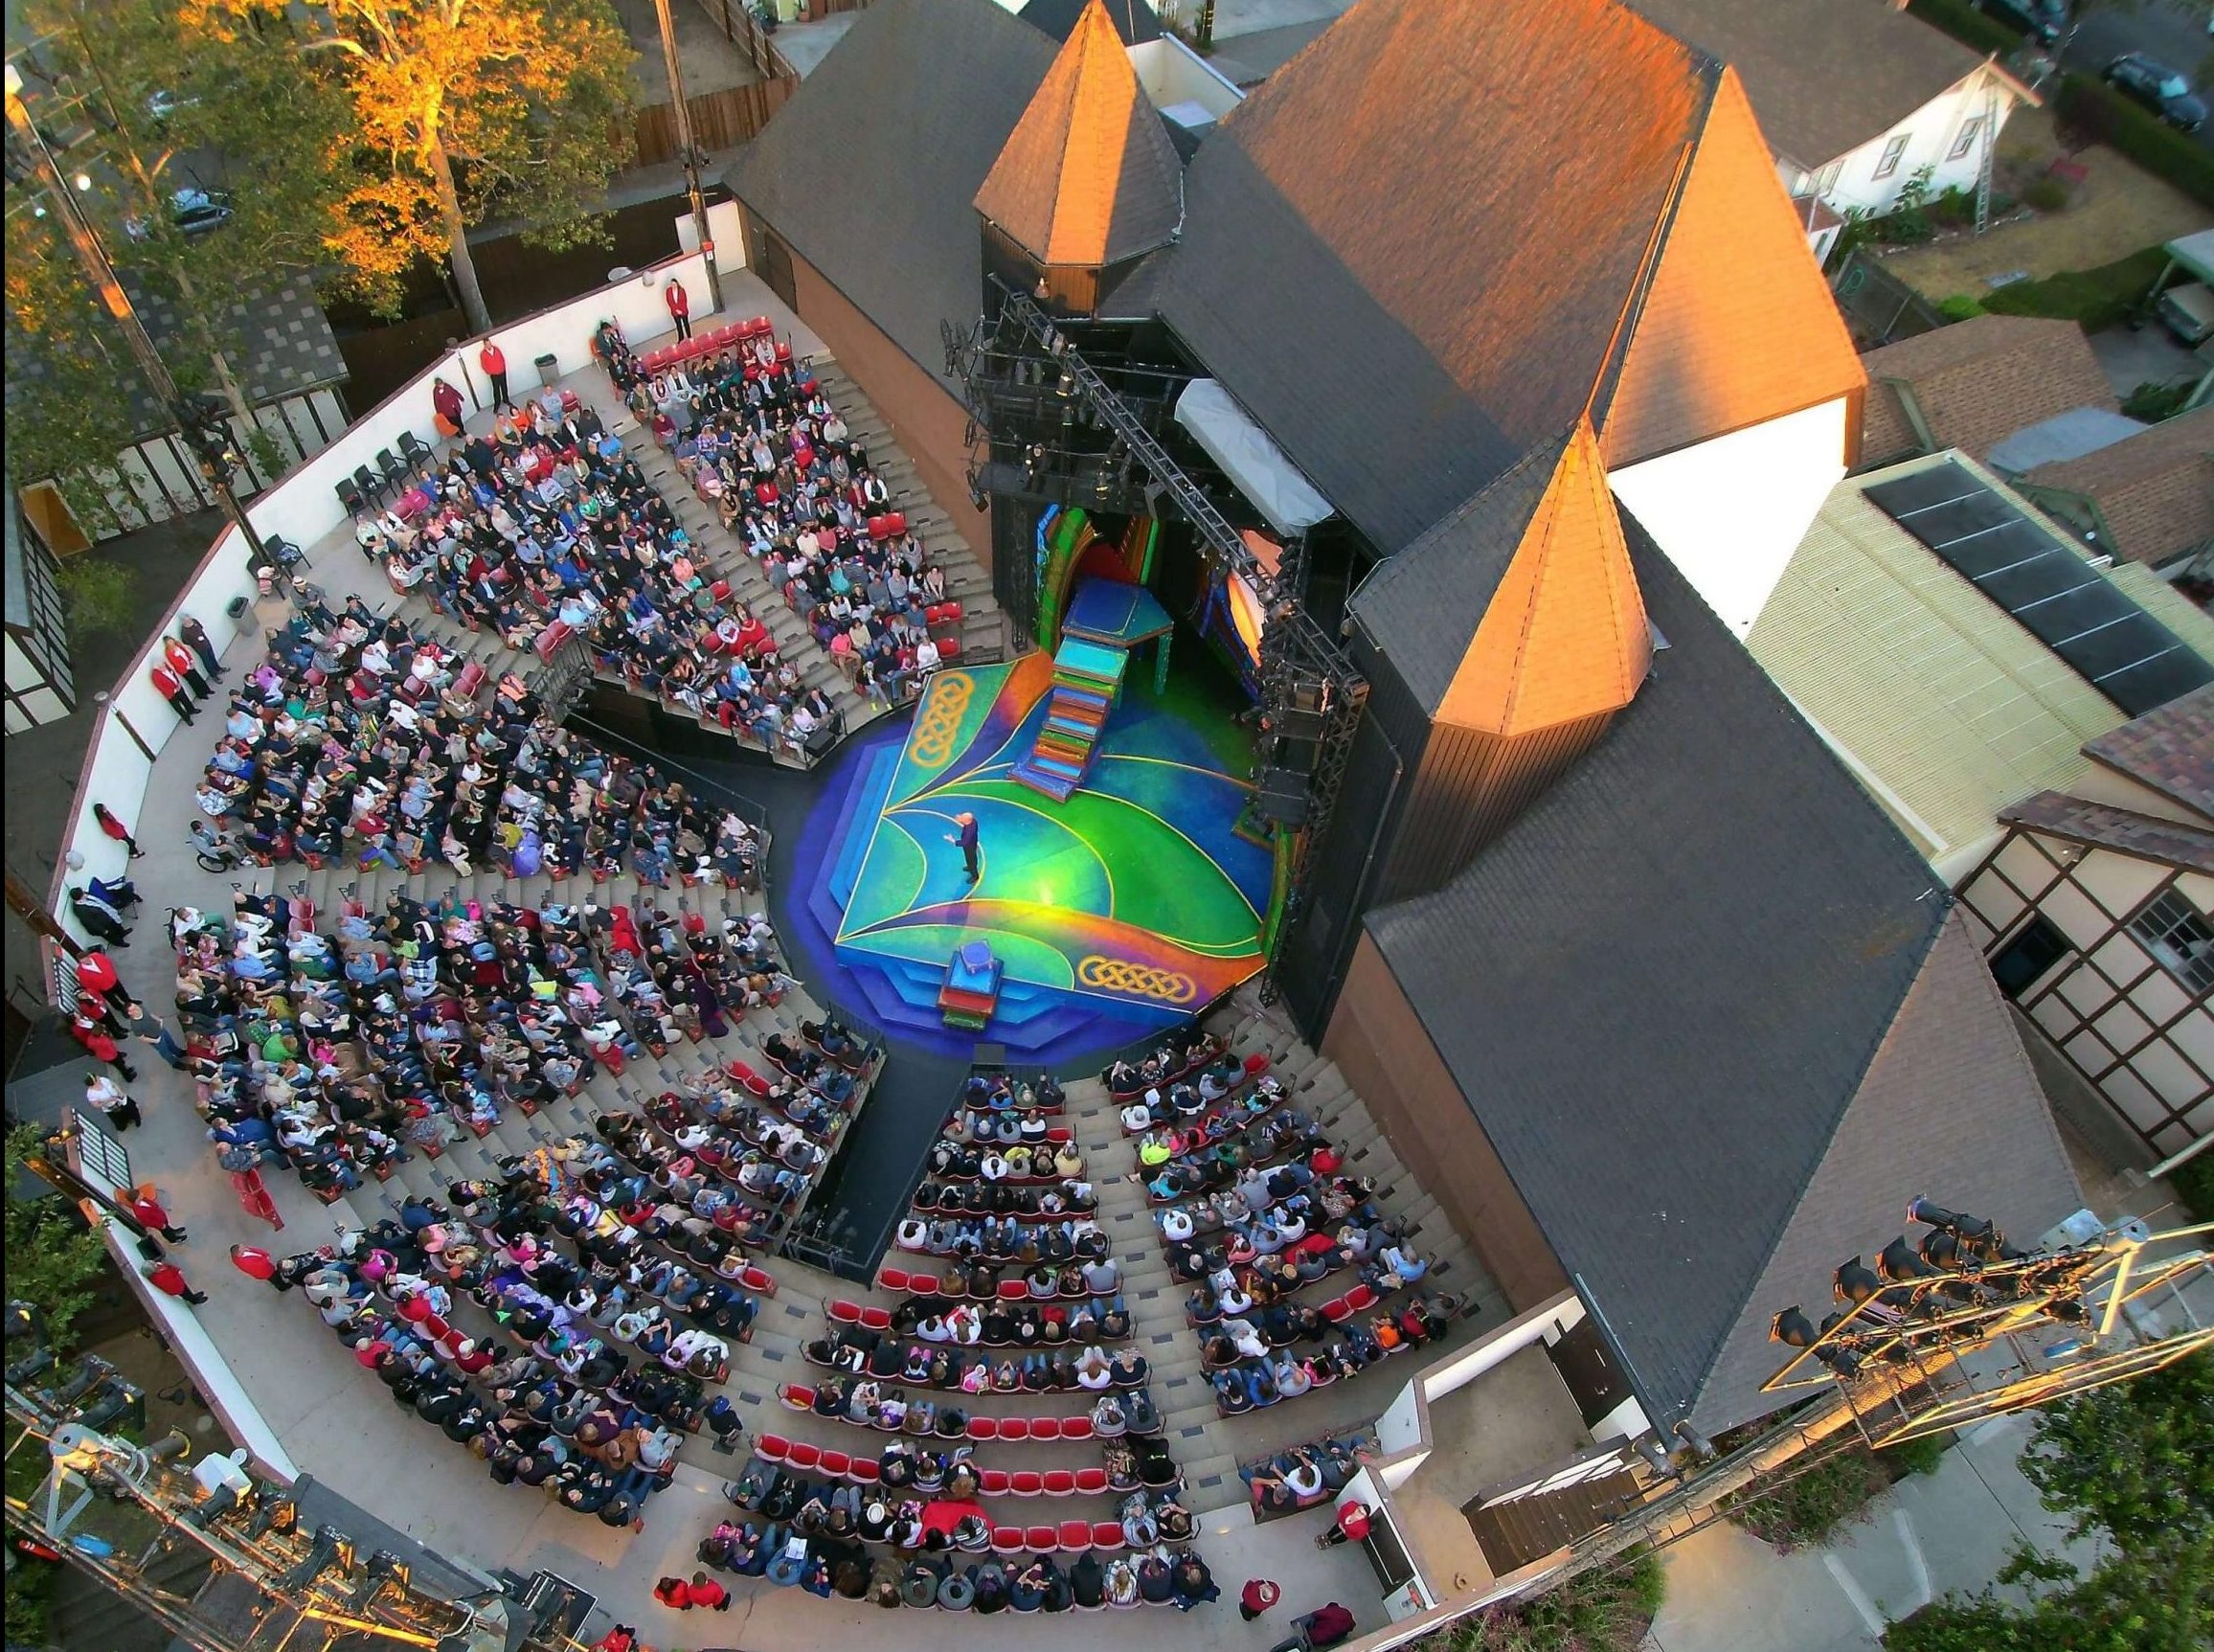 Ariel photo of the stage and seating at Solvang Festival outdoor theater